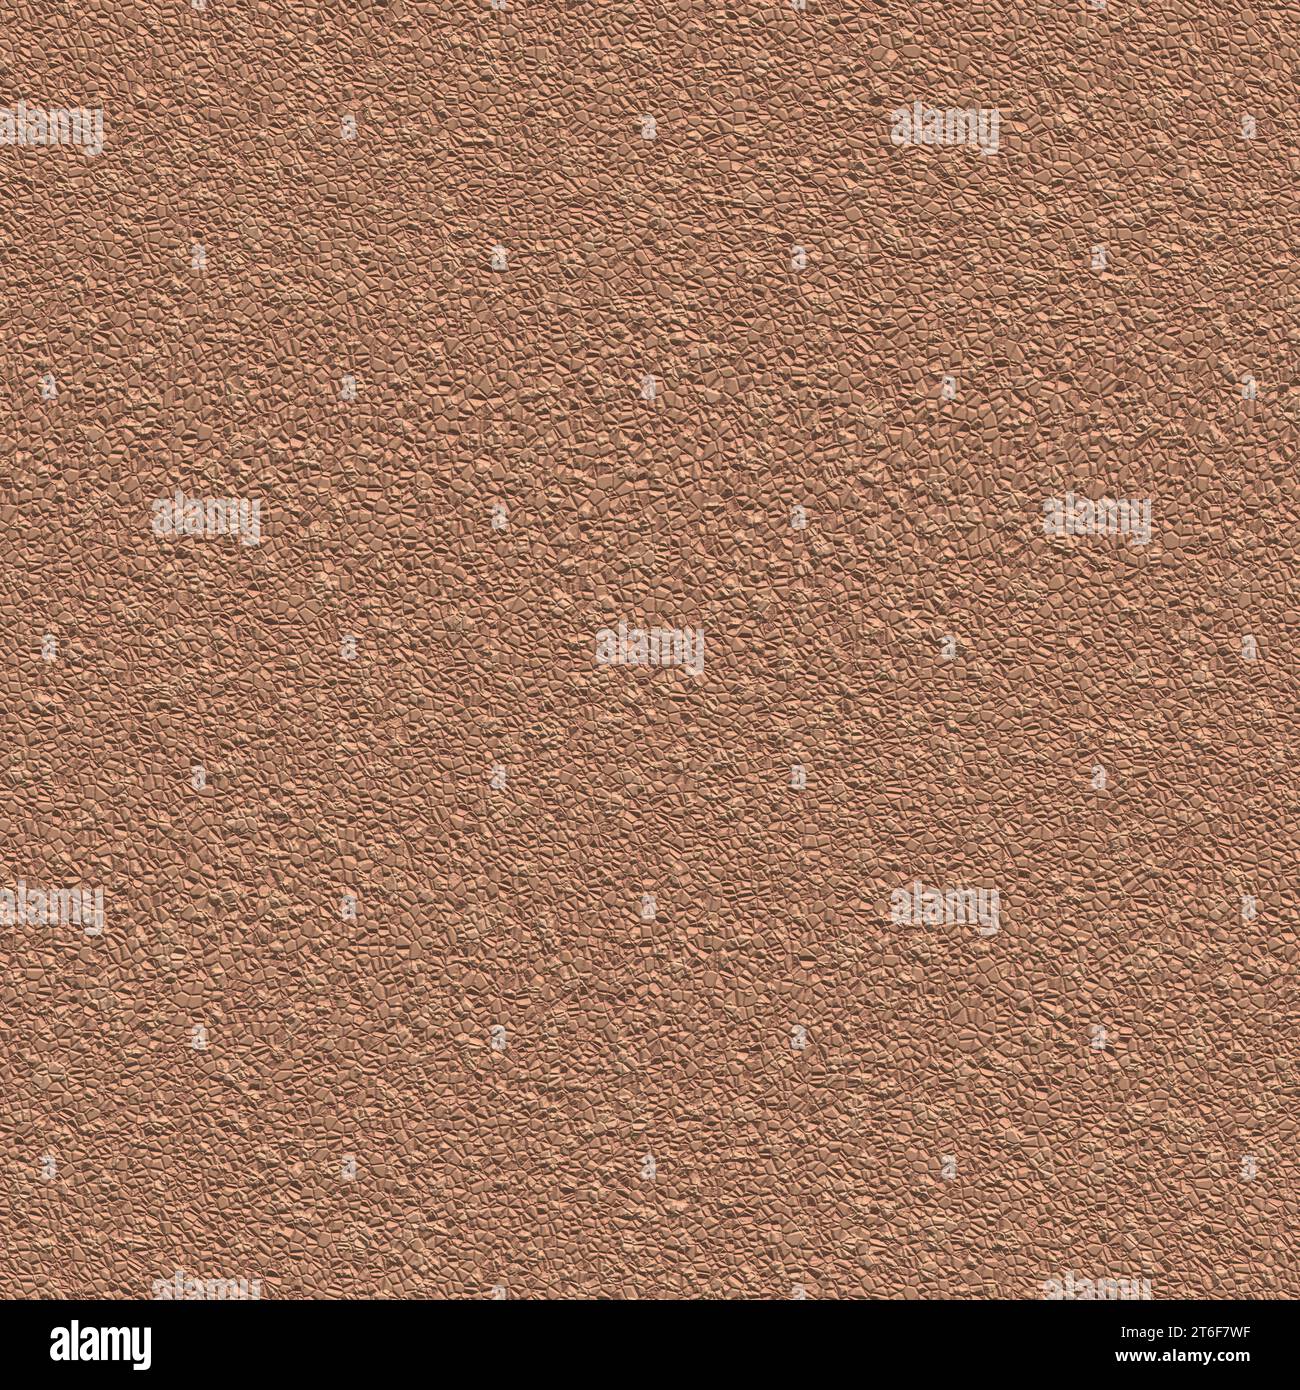 generic plain cork texture, design elements for boards and reminders Stock Photo